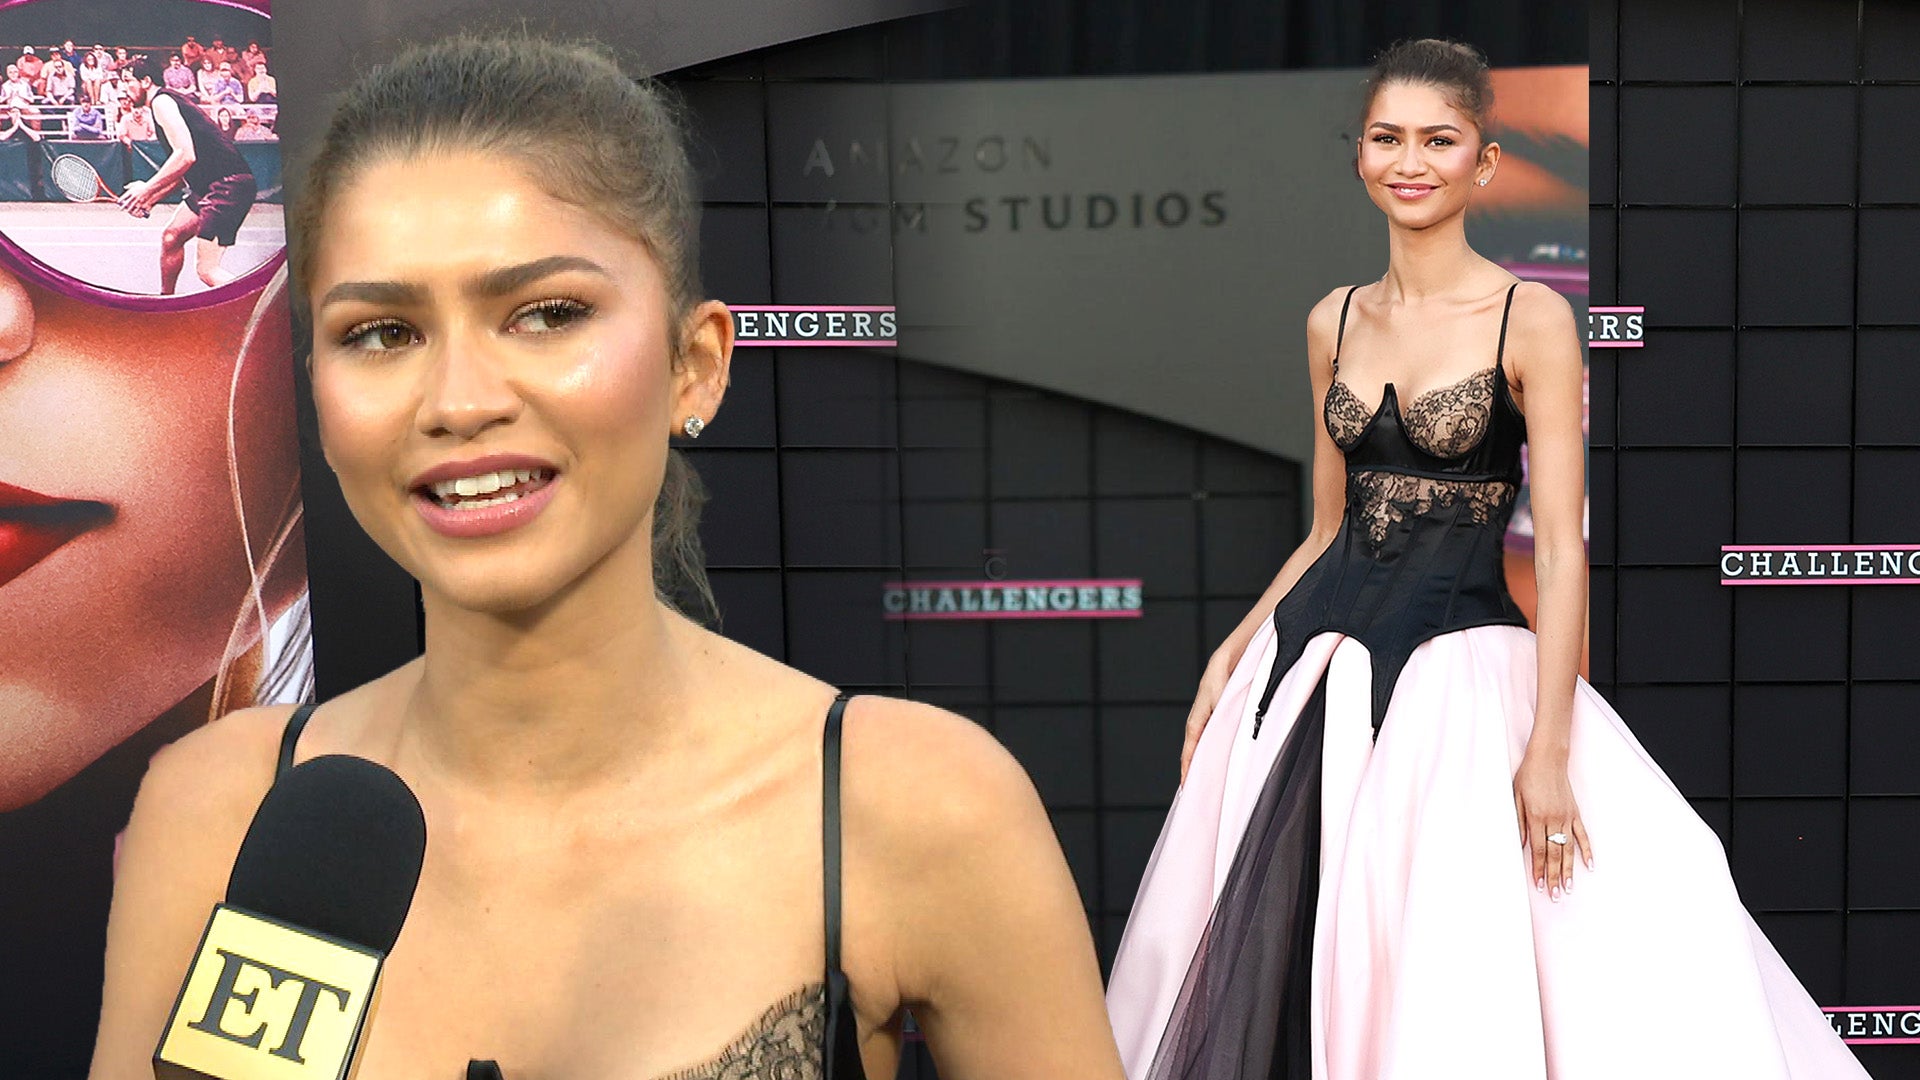 Zendaya Becomes "Red Carpet Character' to Have Fun With Fashion on "Challengers" Press Tour